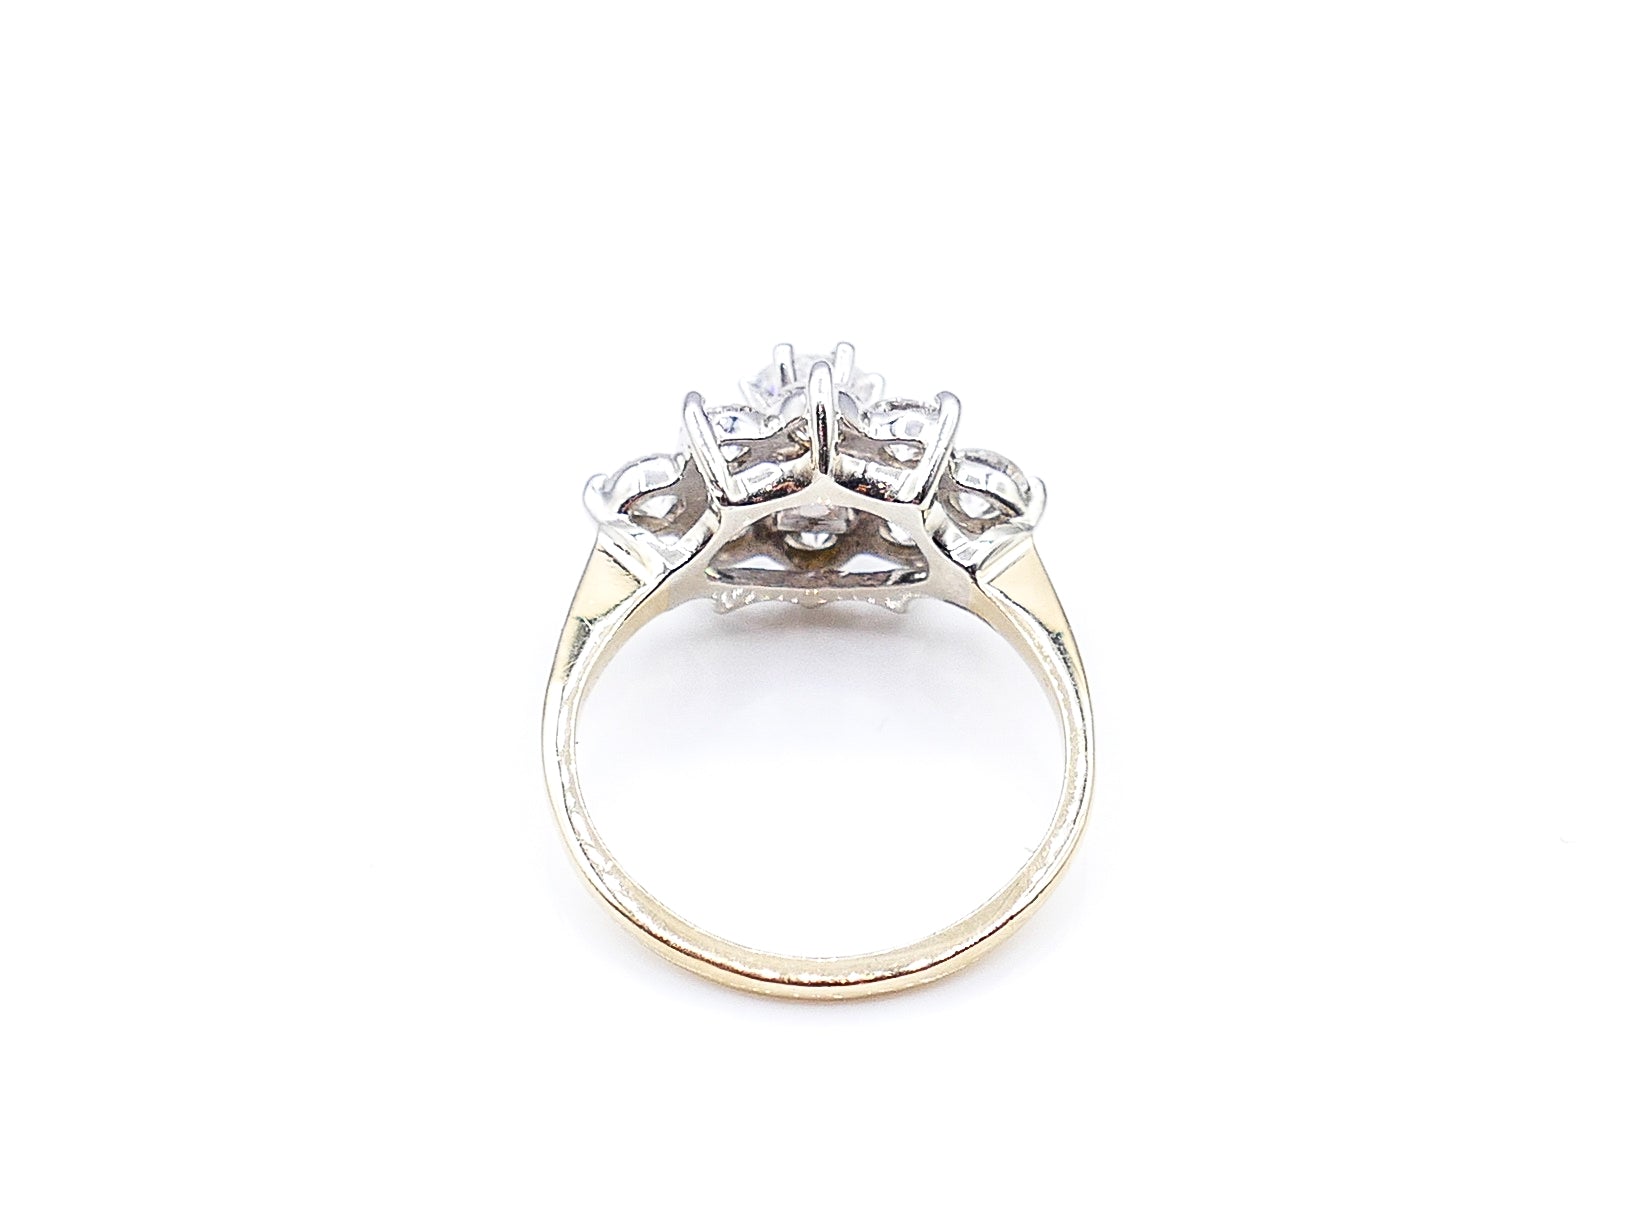 Retro Two-Toned Oval Flower Diamond Ring